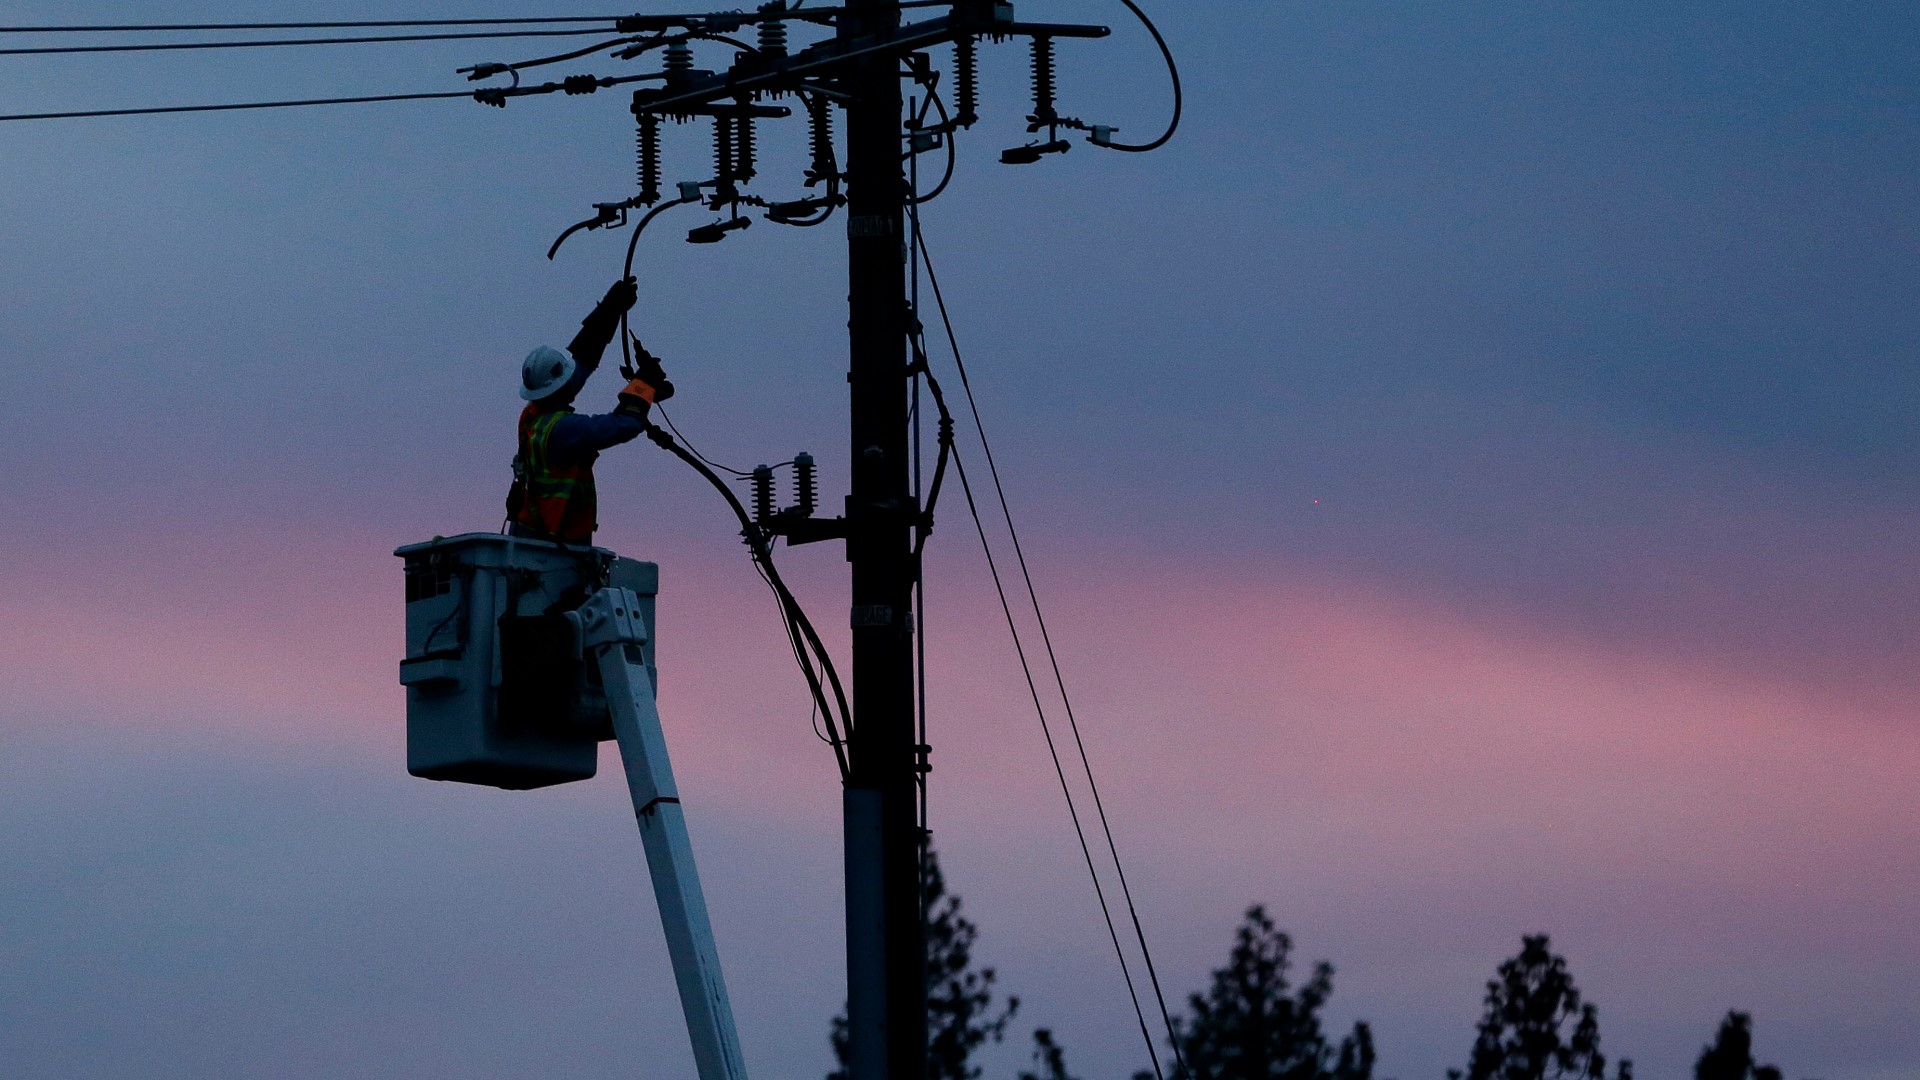 The buried lines will be installed as PG&E rebuilds the entire power grid in Paradise. The electric company needs to replace 74 miles of damaged natural gas lines.